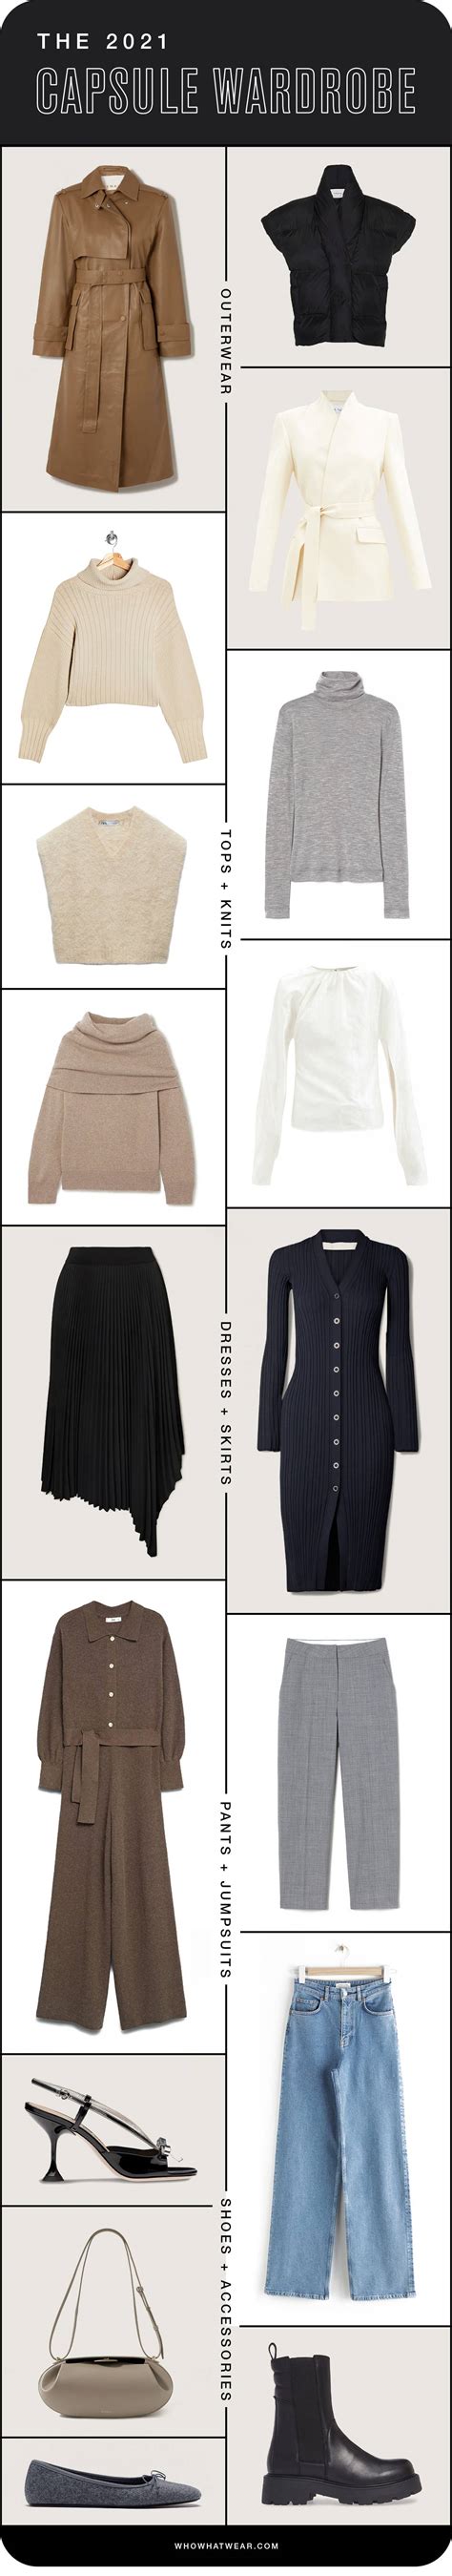 The 2021 Capsule Wardrobe For Women Over 50 Who What Wear